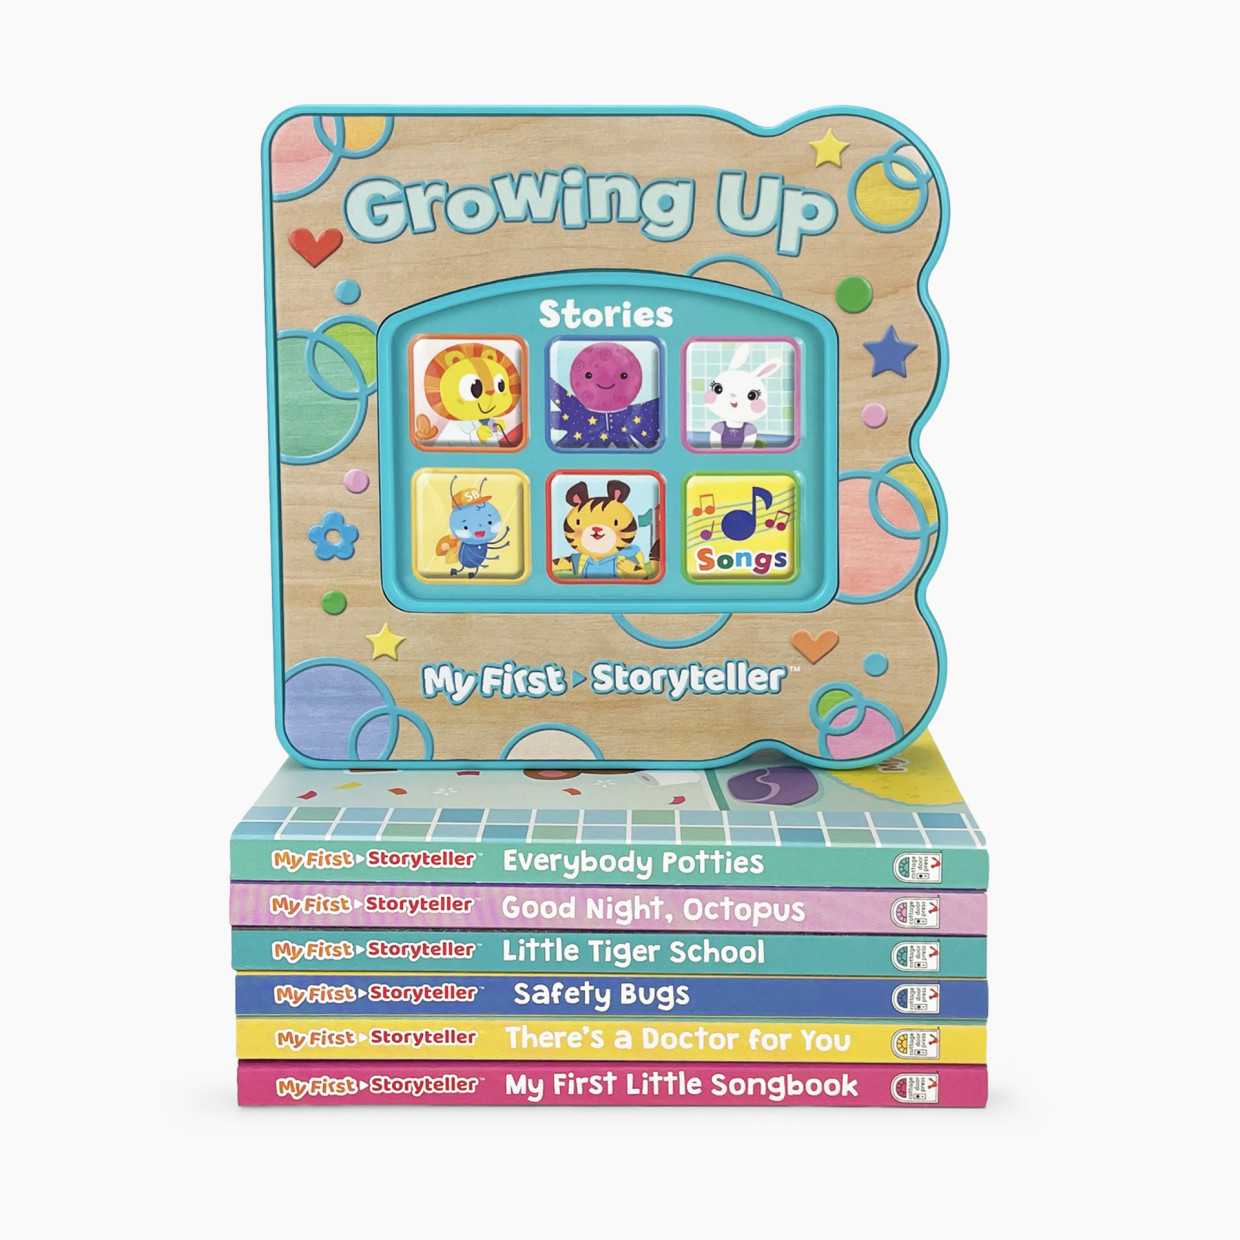 Growing Up: My First Storyteller - Interactive Electronic Book and Music Player Set.